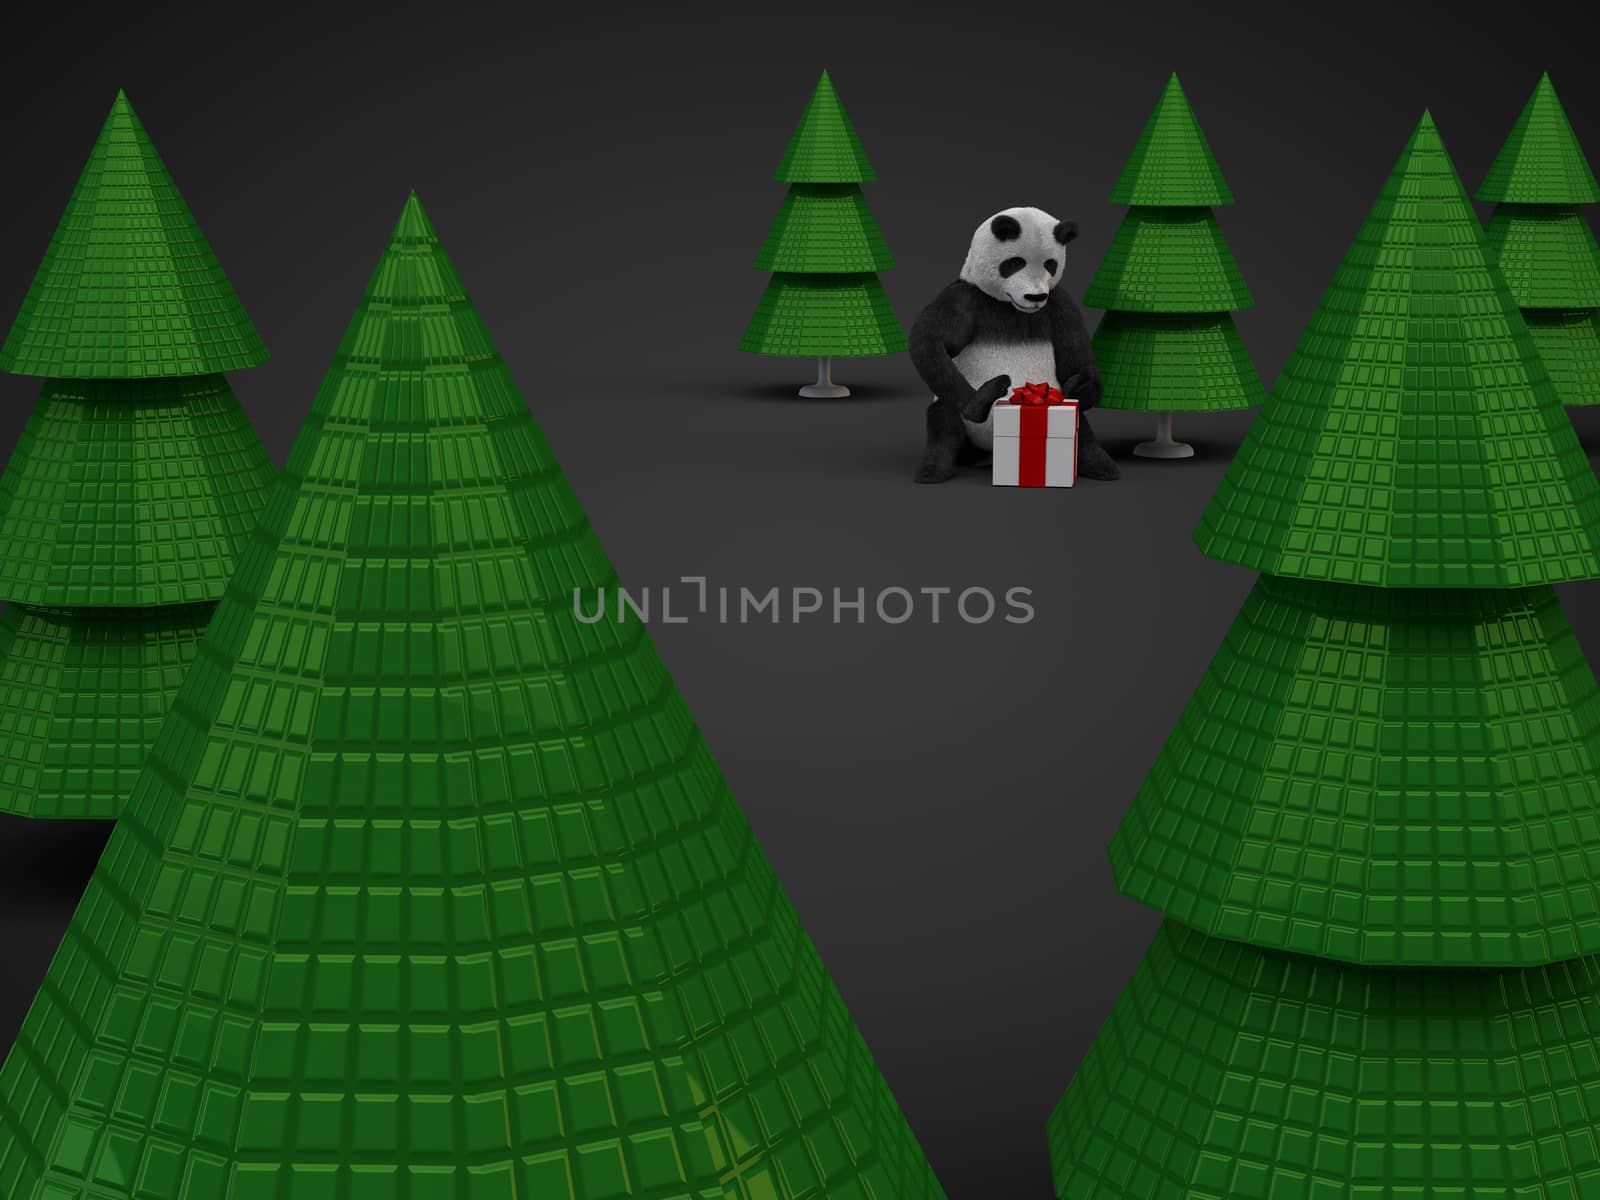 render illustration panda fluffy furry teddy bear sitten between christmas trees and opens white gift box with red ribbon knot bow tie three dimensional spruce new year forest bear character on dark